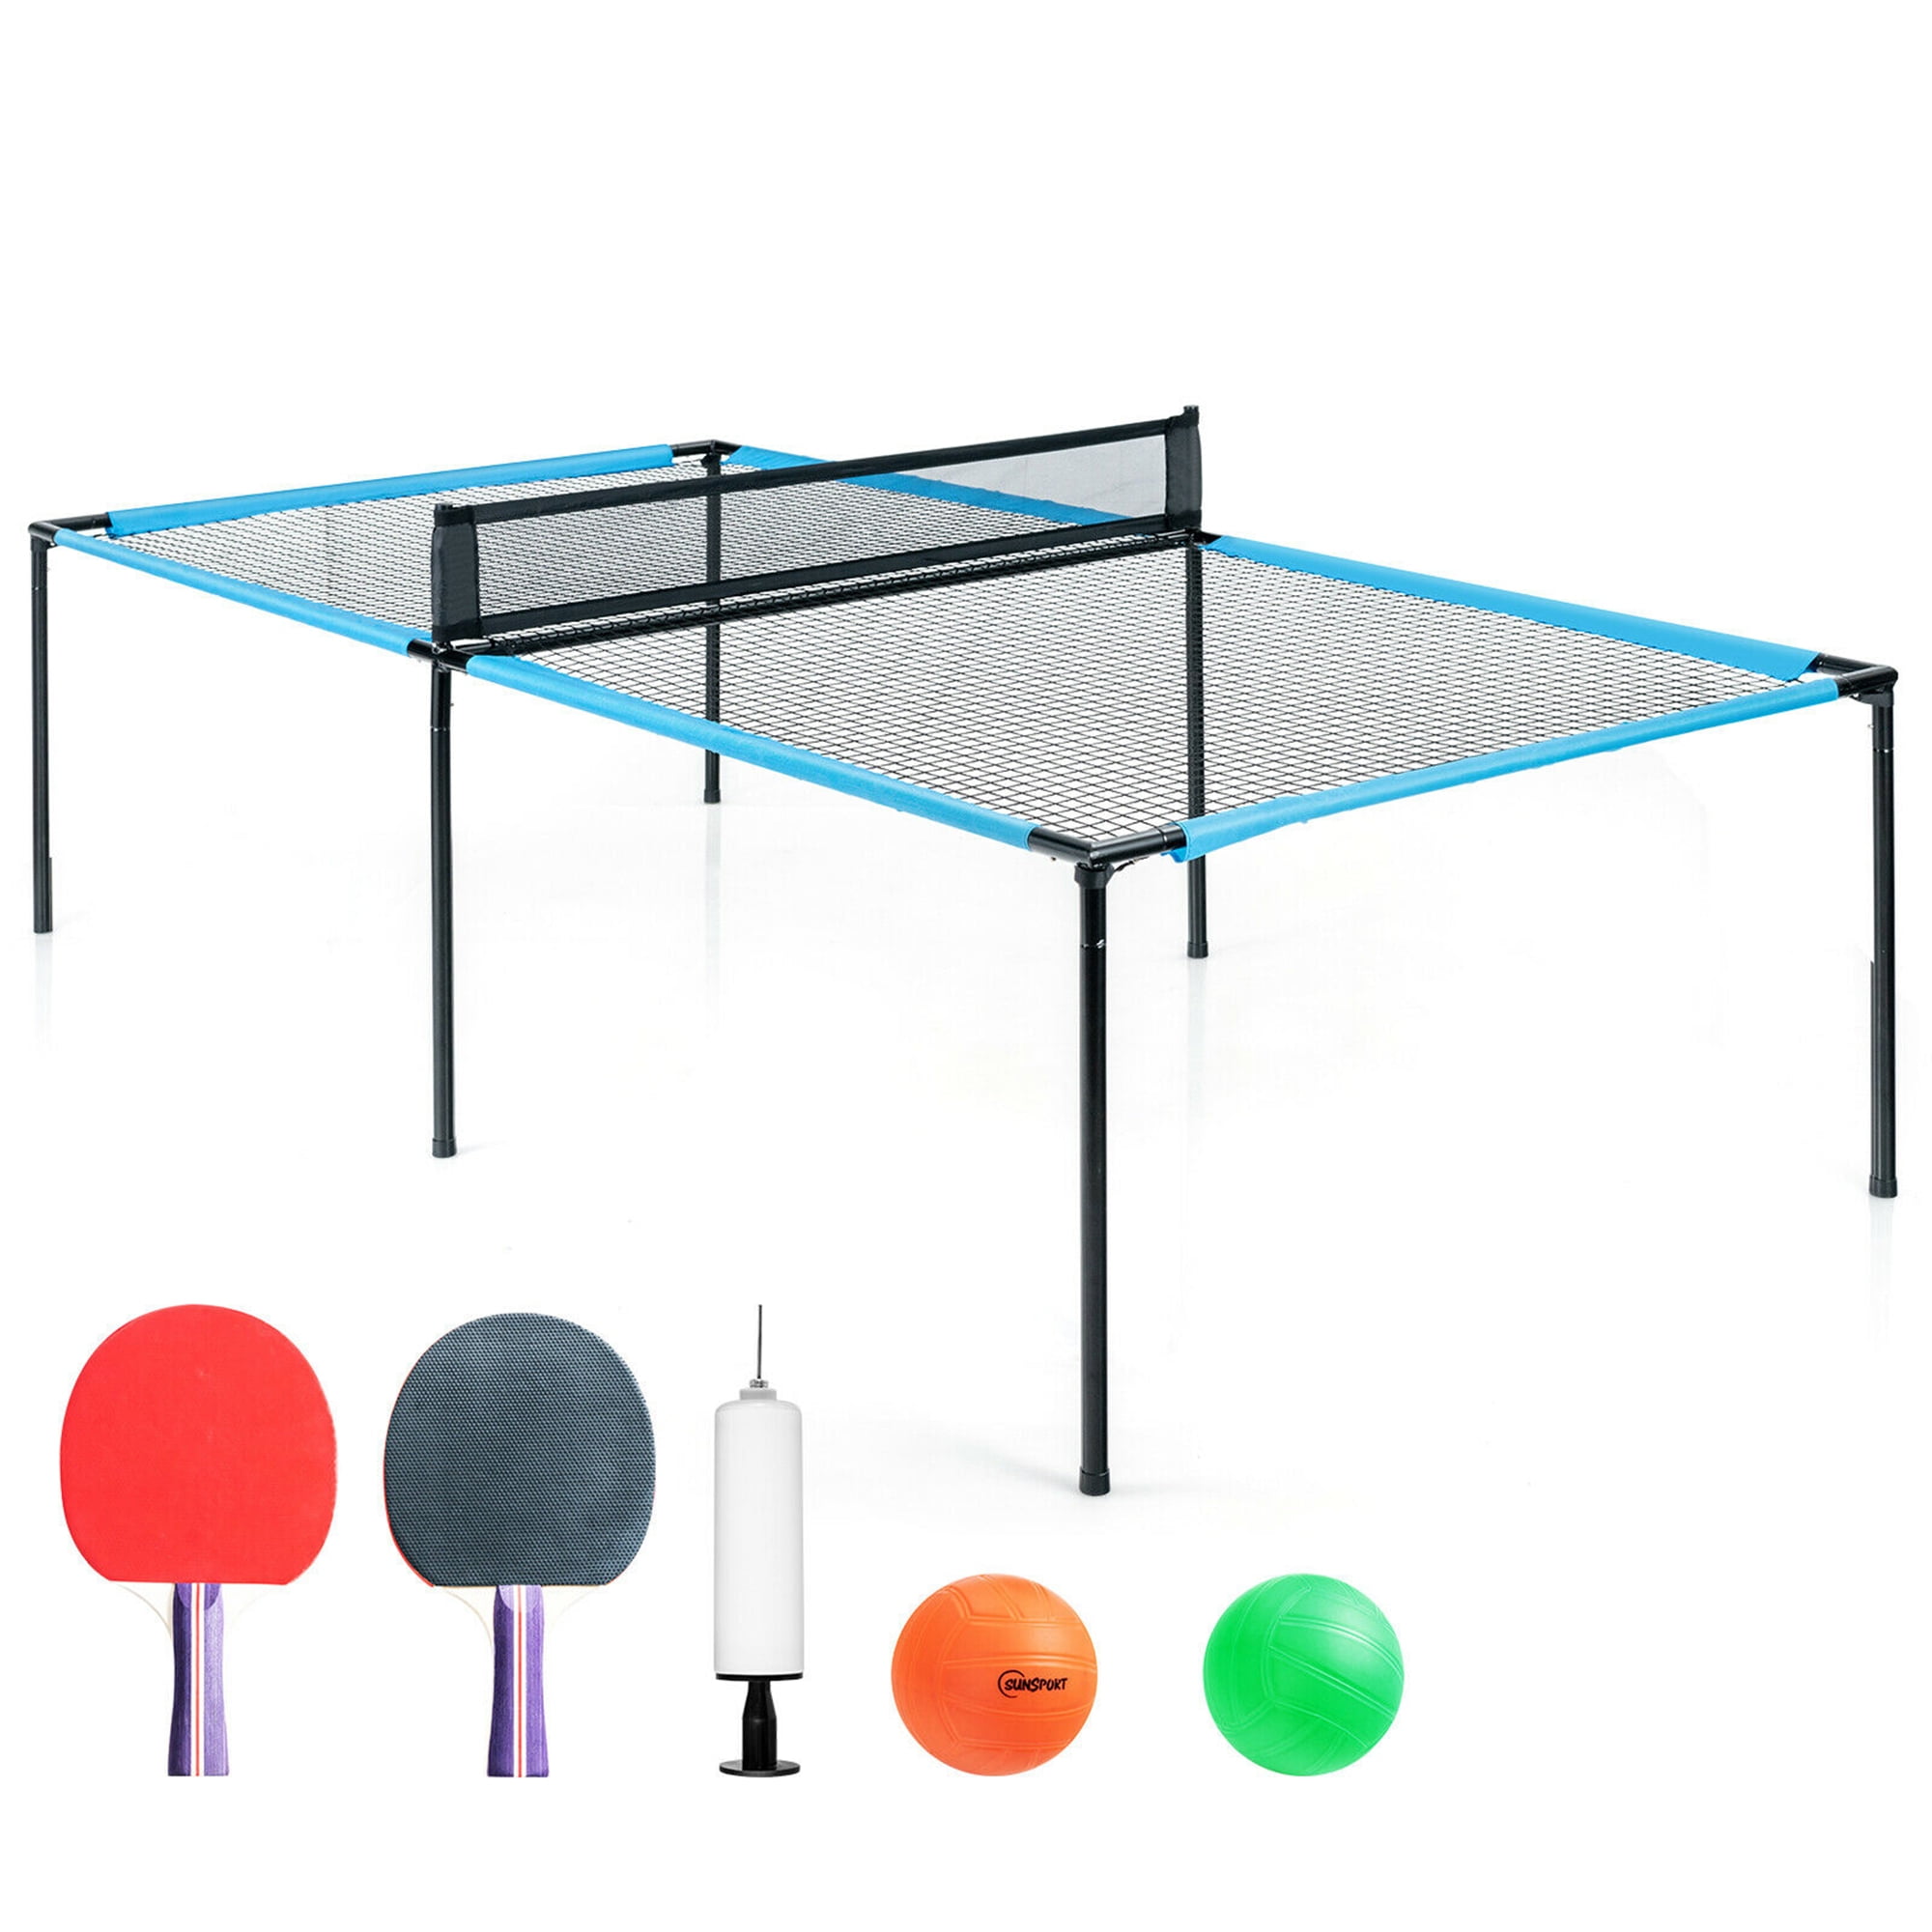 2 Player Game Table Tennis Retractable Net Portable Ping Pong Net Indoor Games 